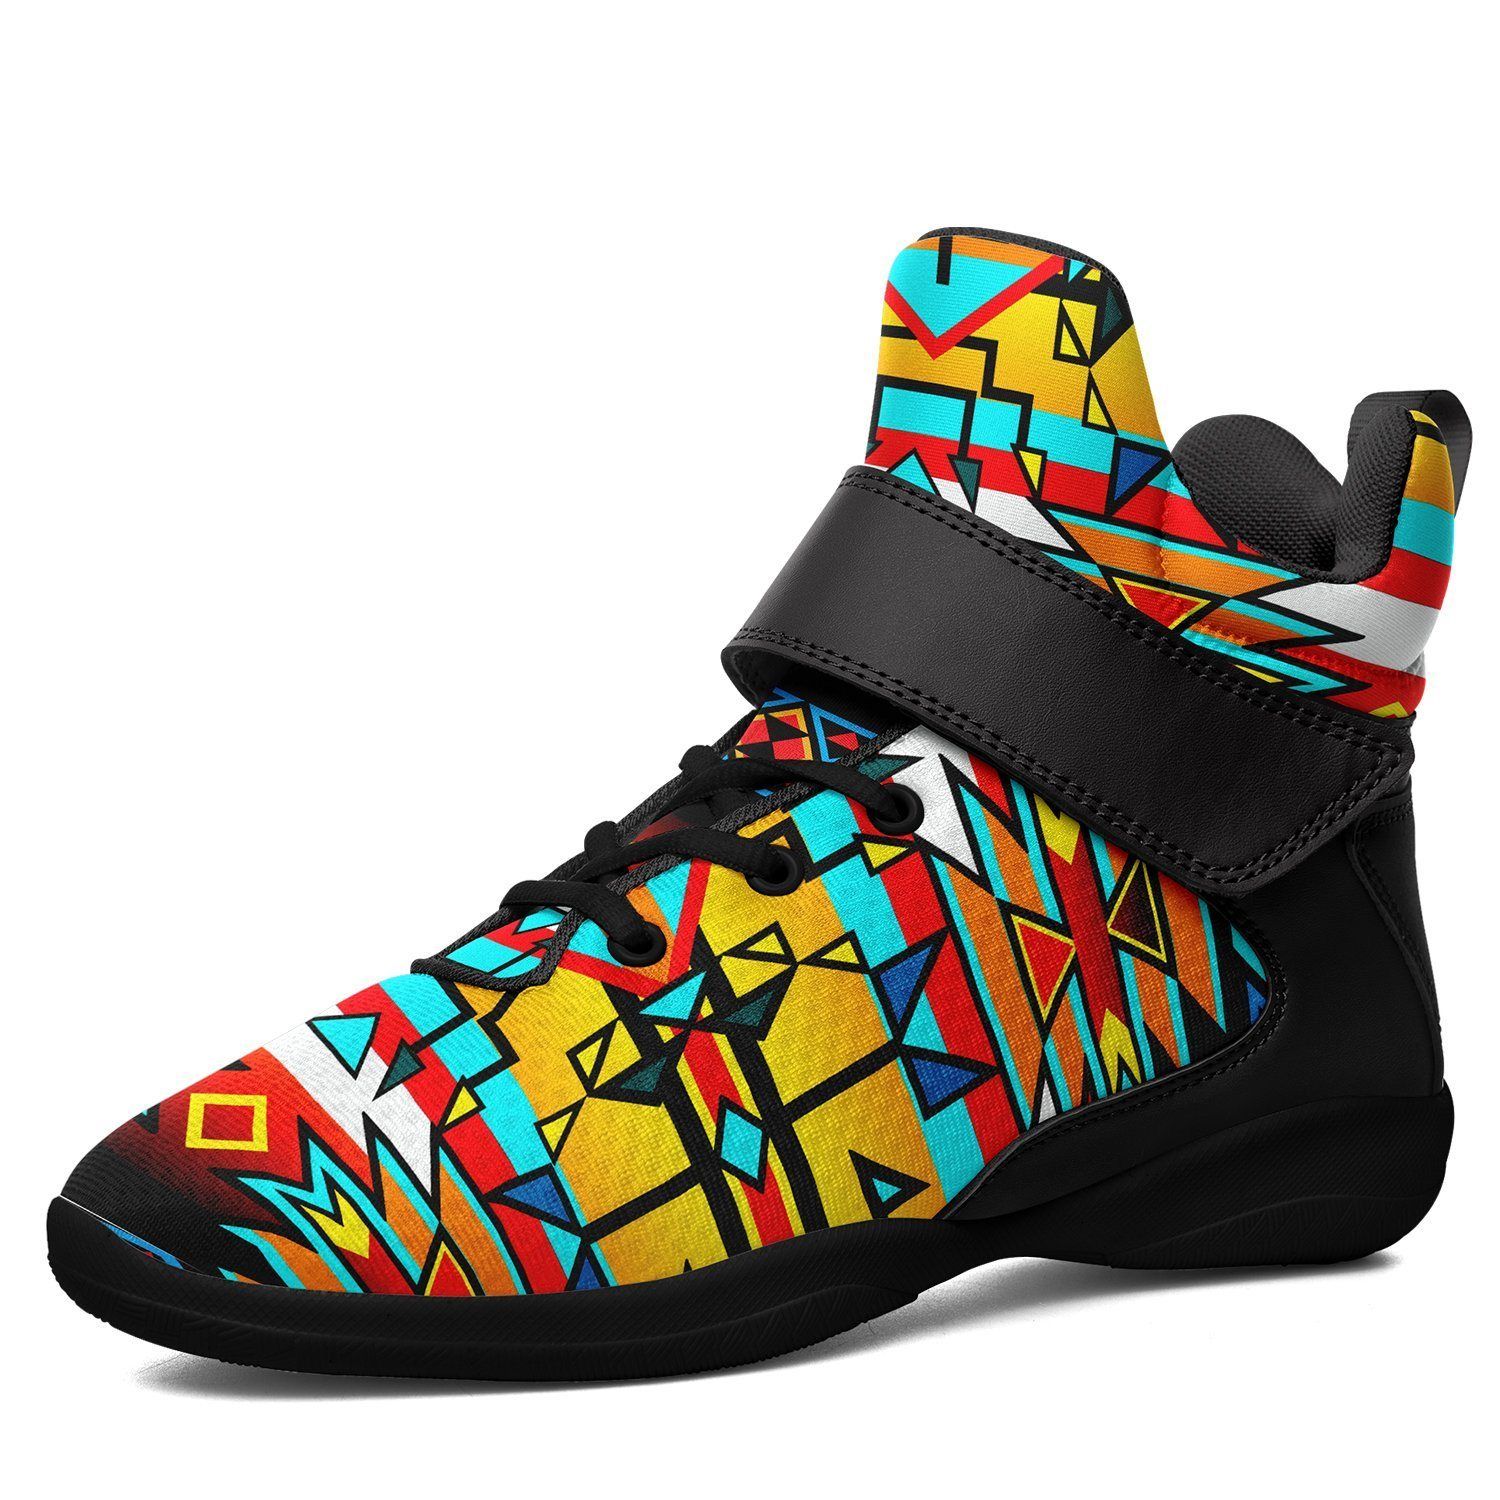 Force of Nature Twister Ipottaa Basketball / Sport High Top Shoes - Black Sole 49 Dzine US Men 7 / EUR 40 Black Sole with Black Strap 